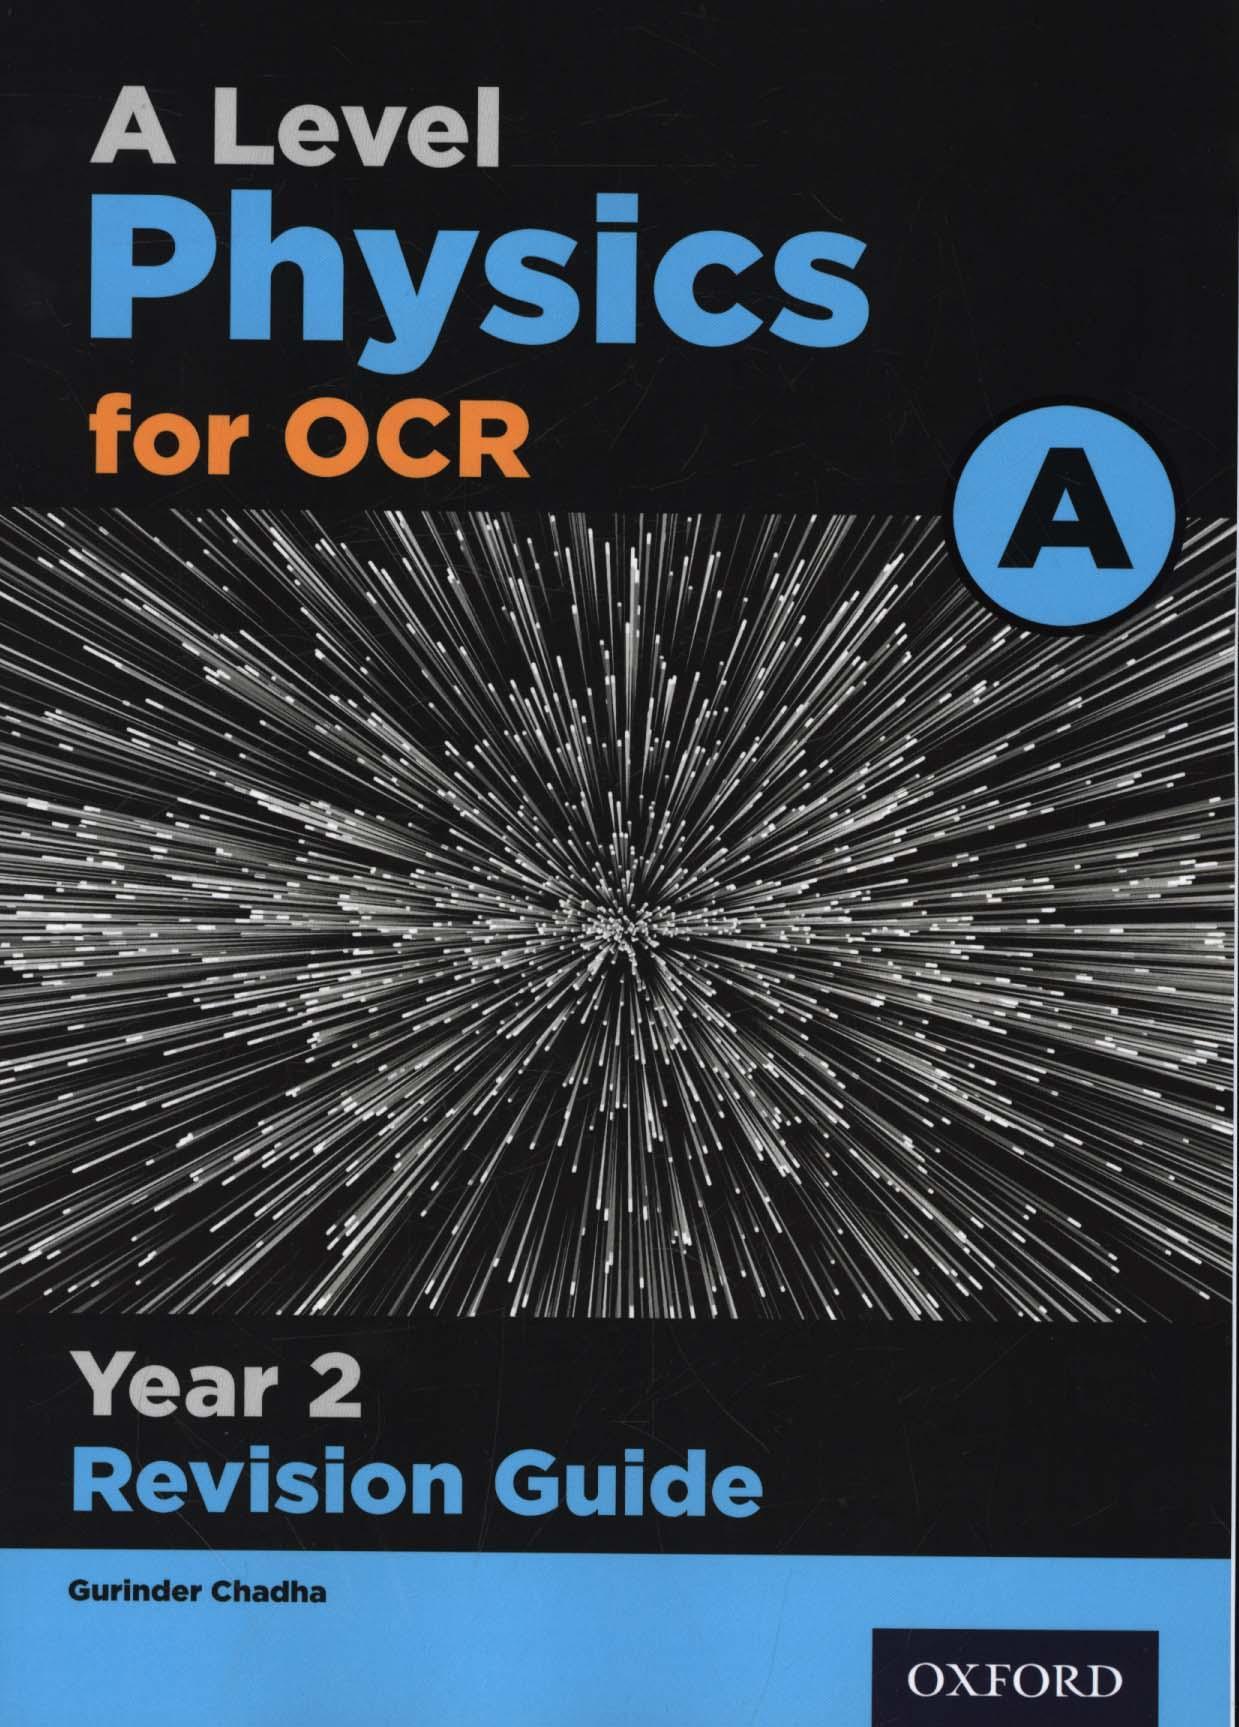 OCR A Level Physics A Year 2 Revision Guide